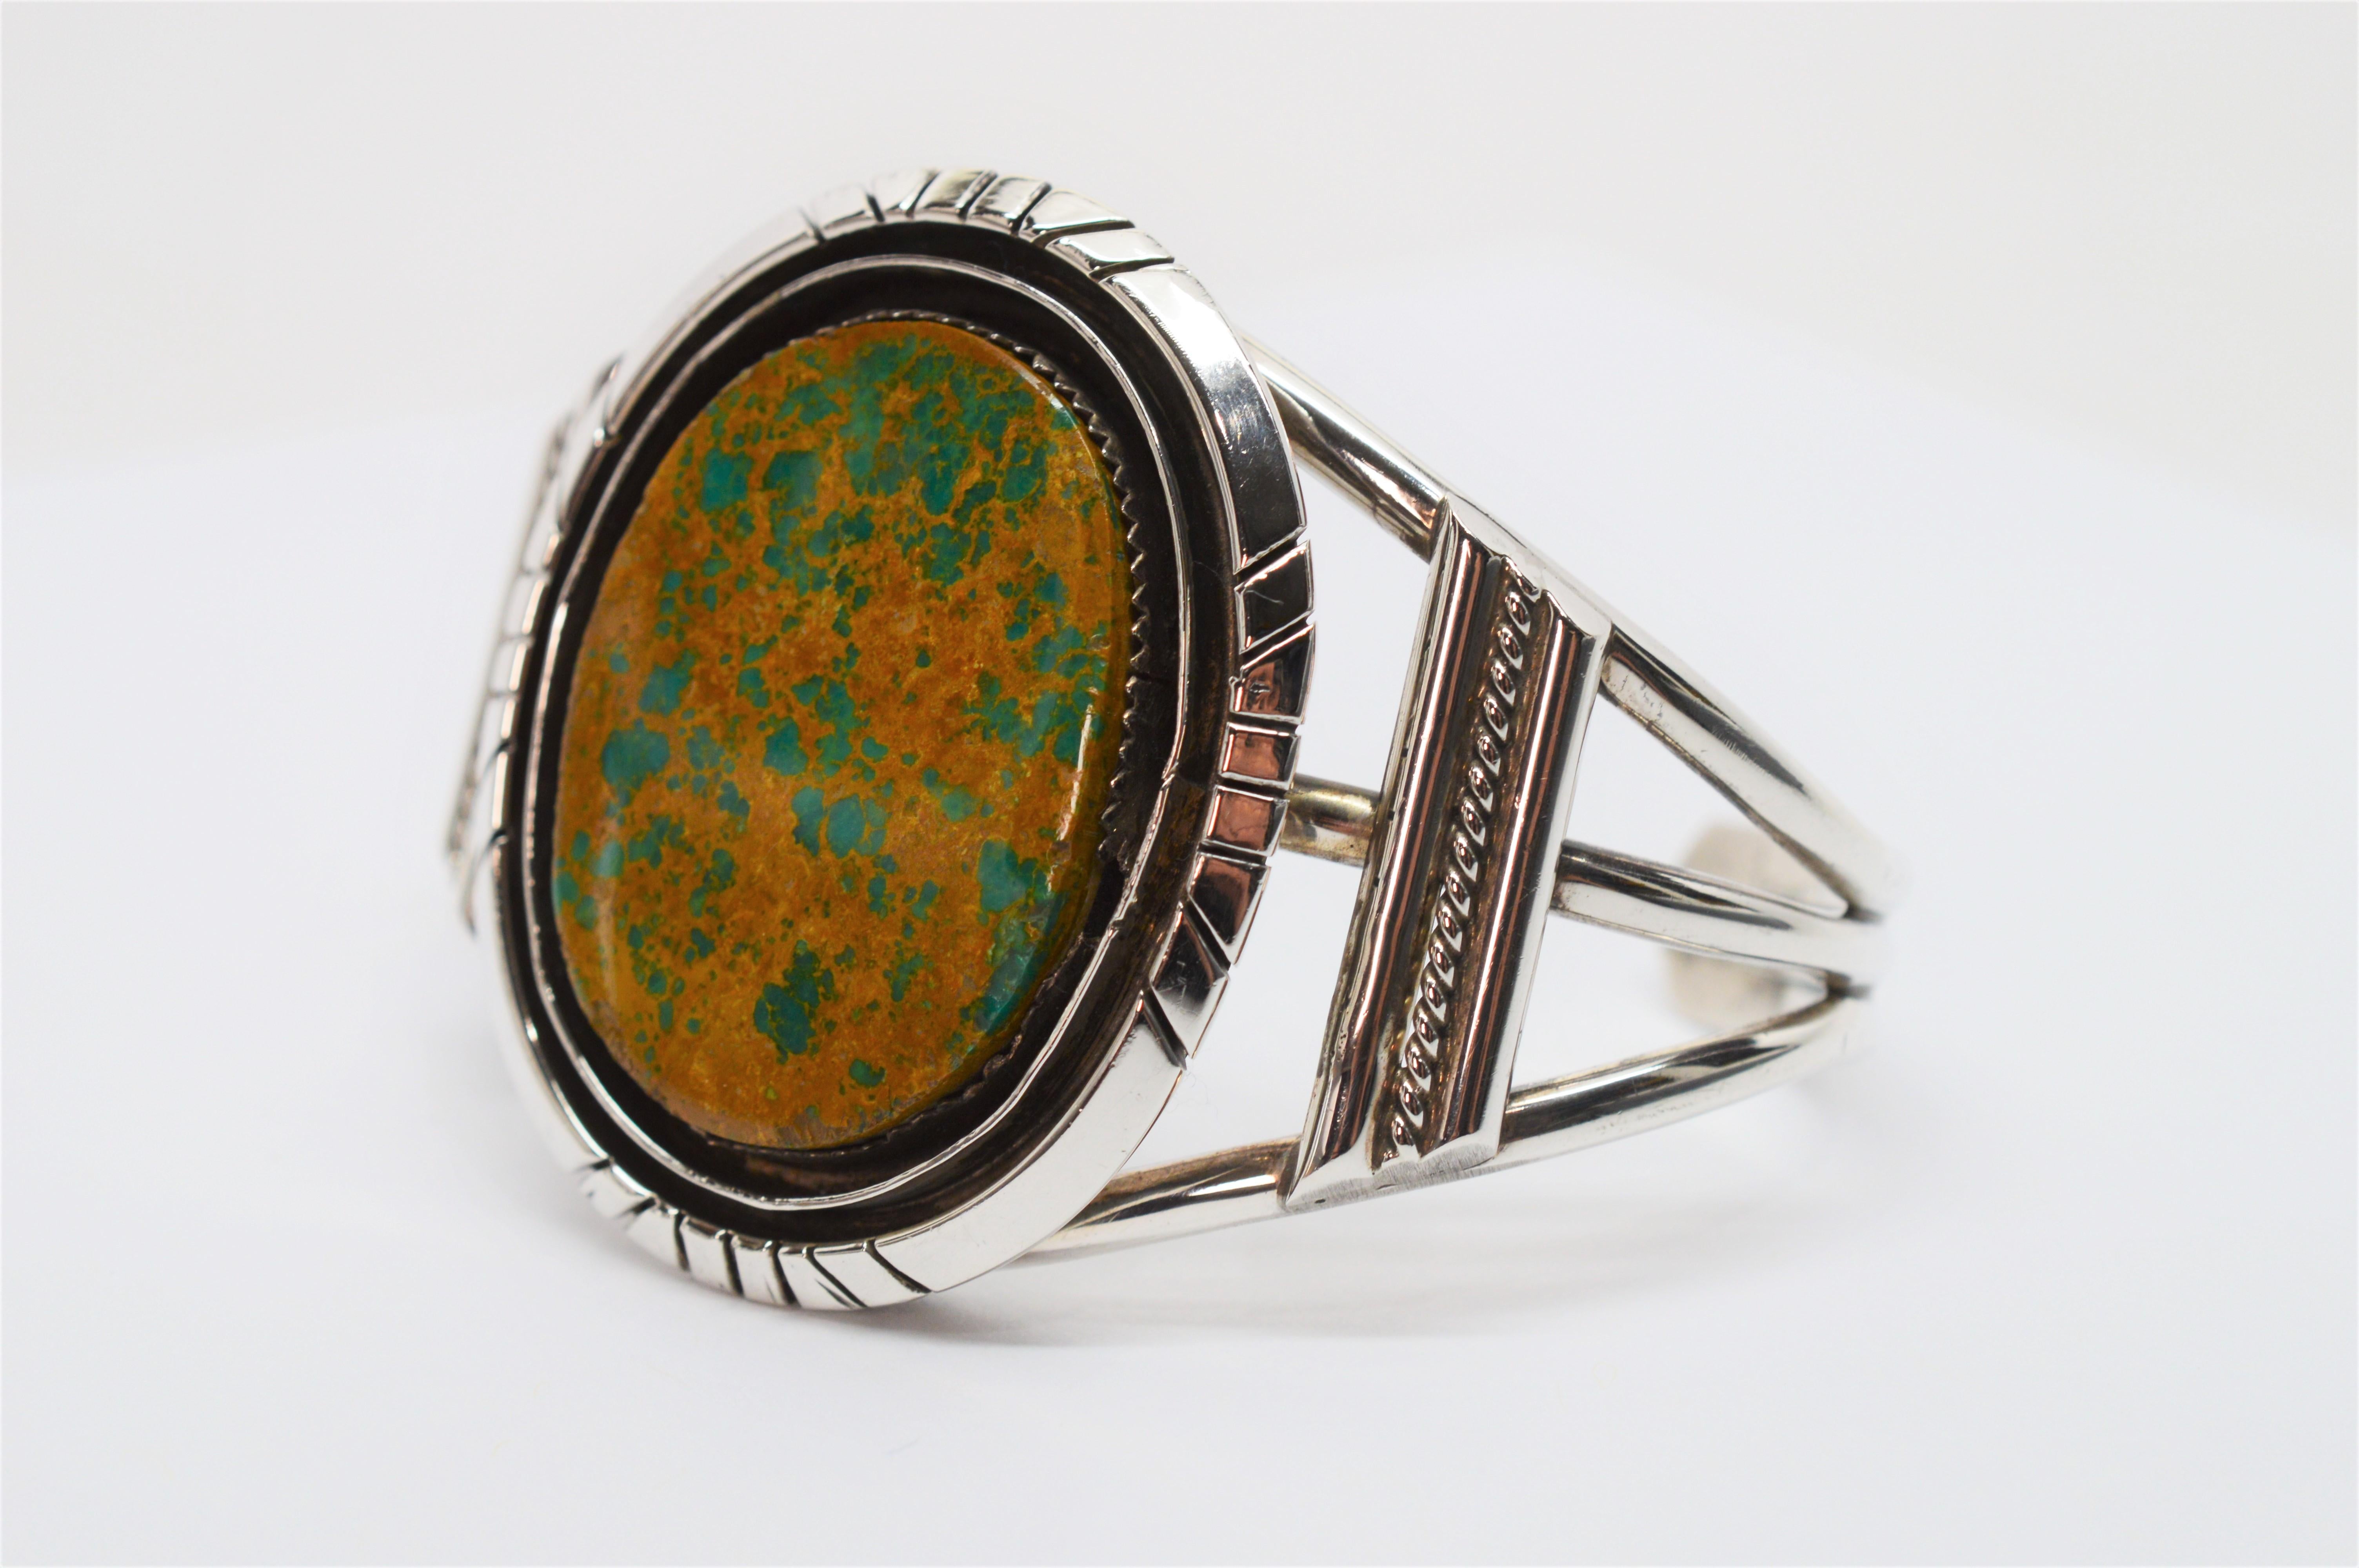 Artisan crafted in sterling silver, this Southwest style cuff bracelet is purposely designed to showcase the earthy warm tones of its large 34 x 26mm oval unakite stone. Known as a stone of vision and balance among healing practitioners, this